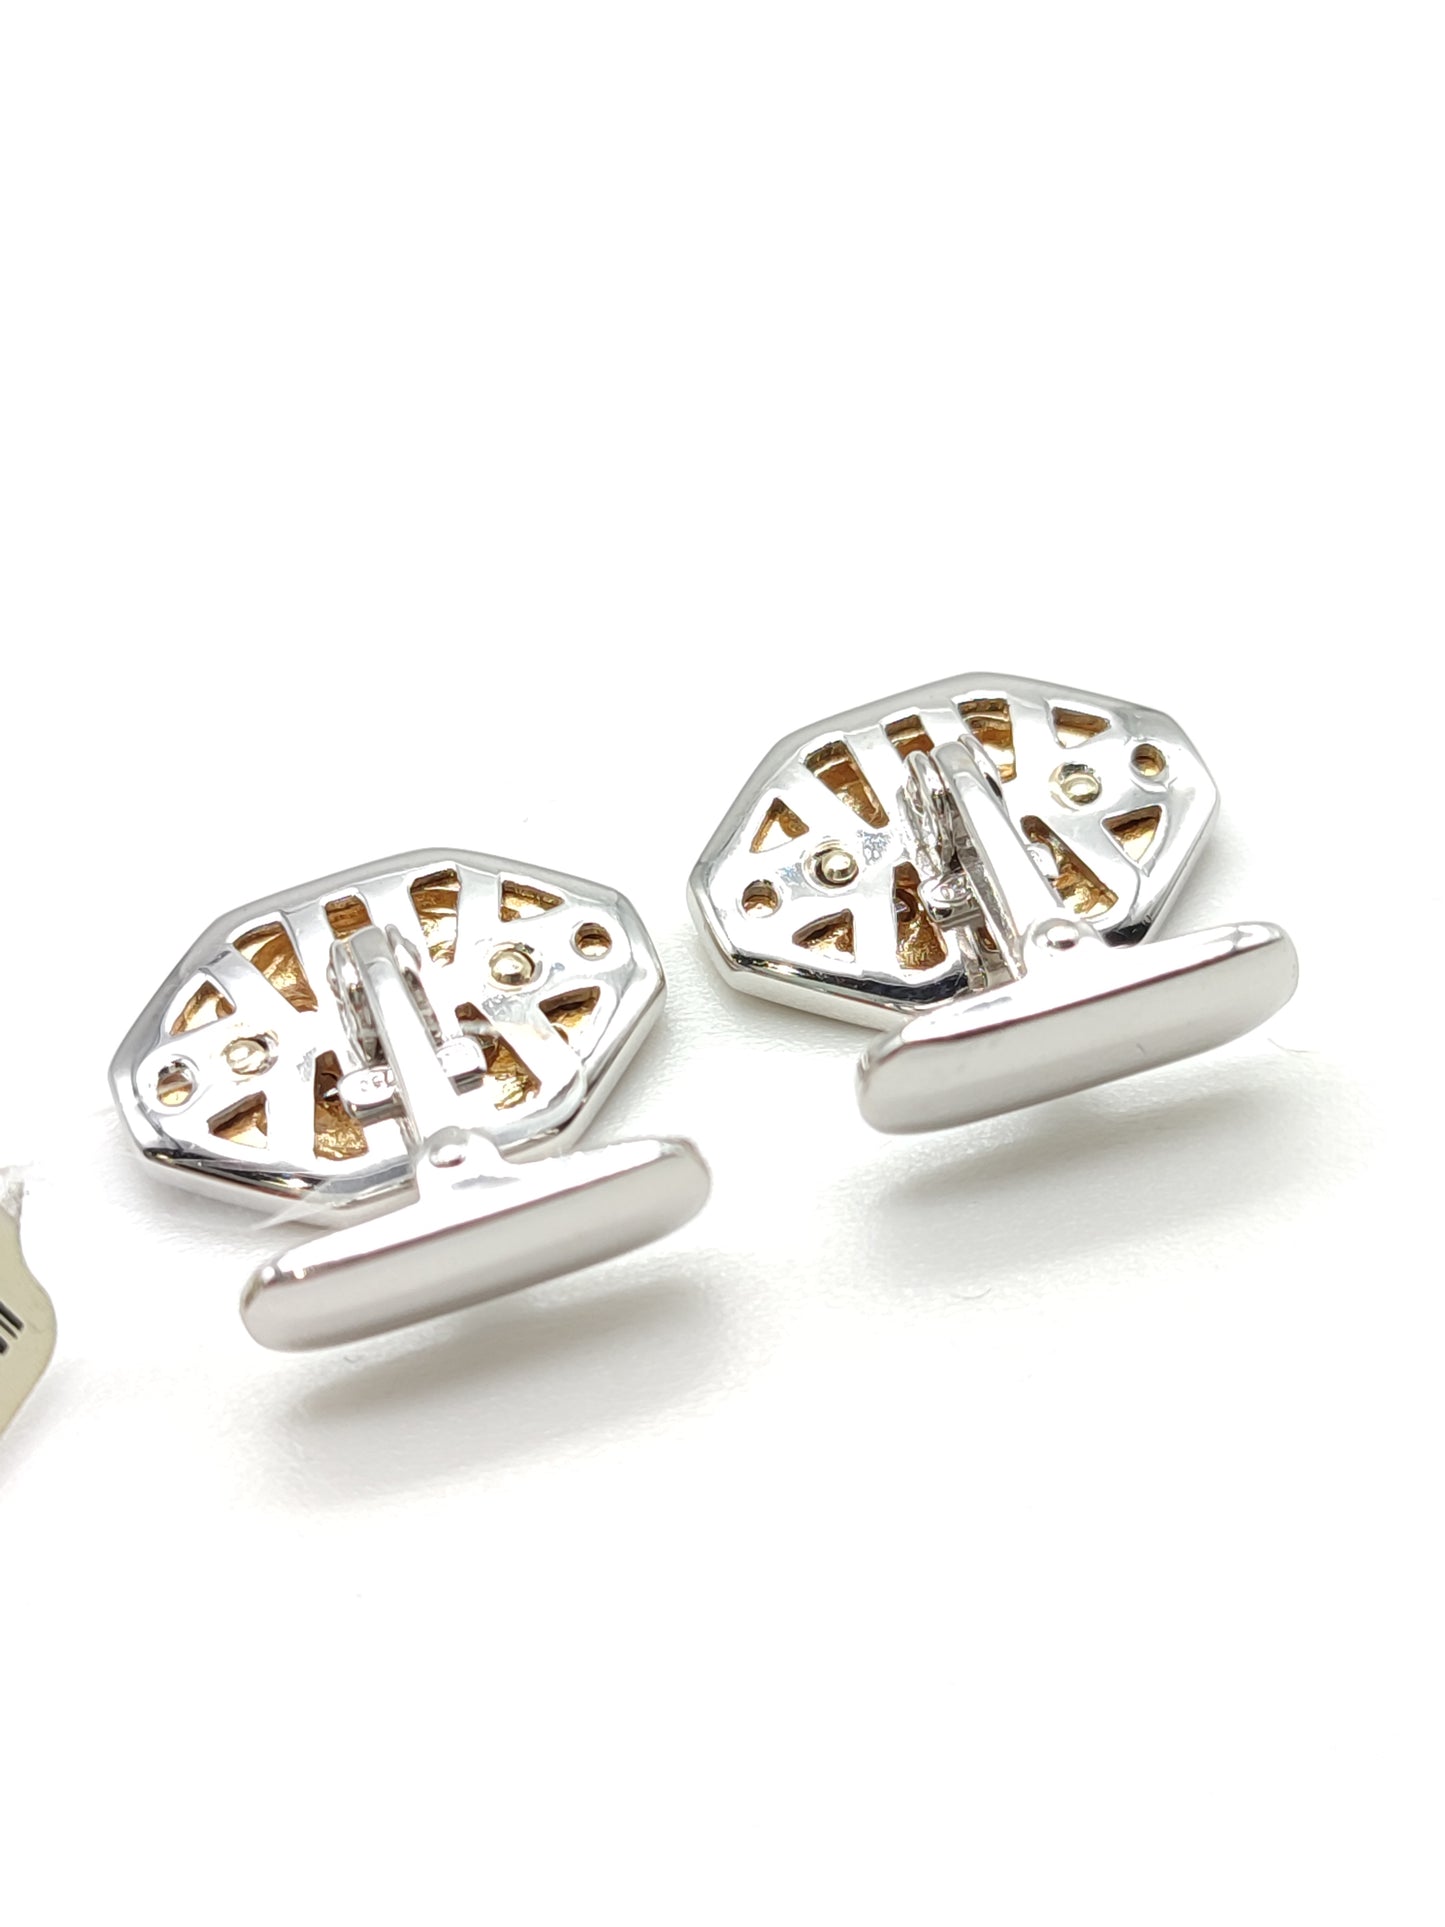 Cufflinks in yellow and white gold